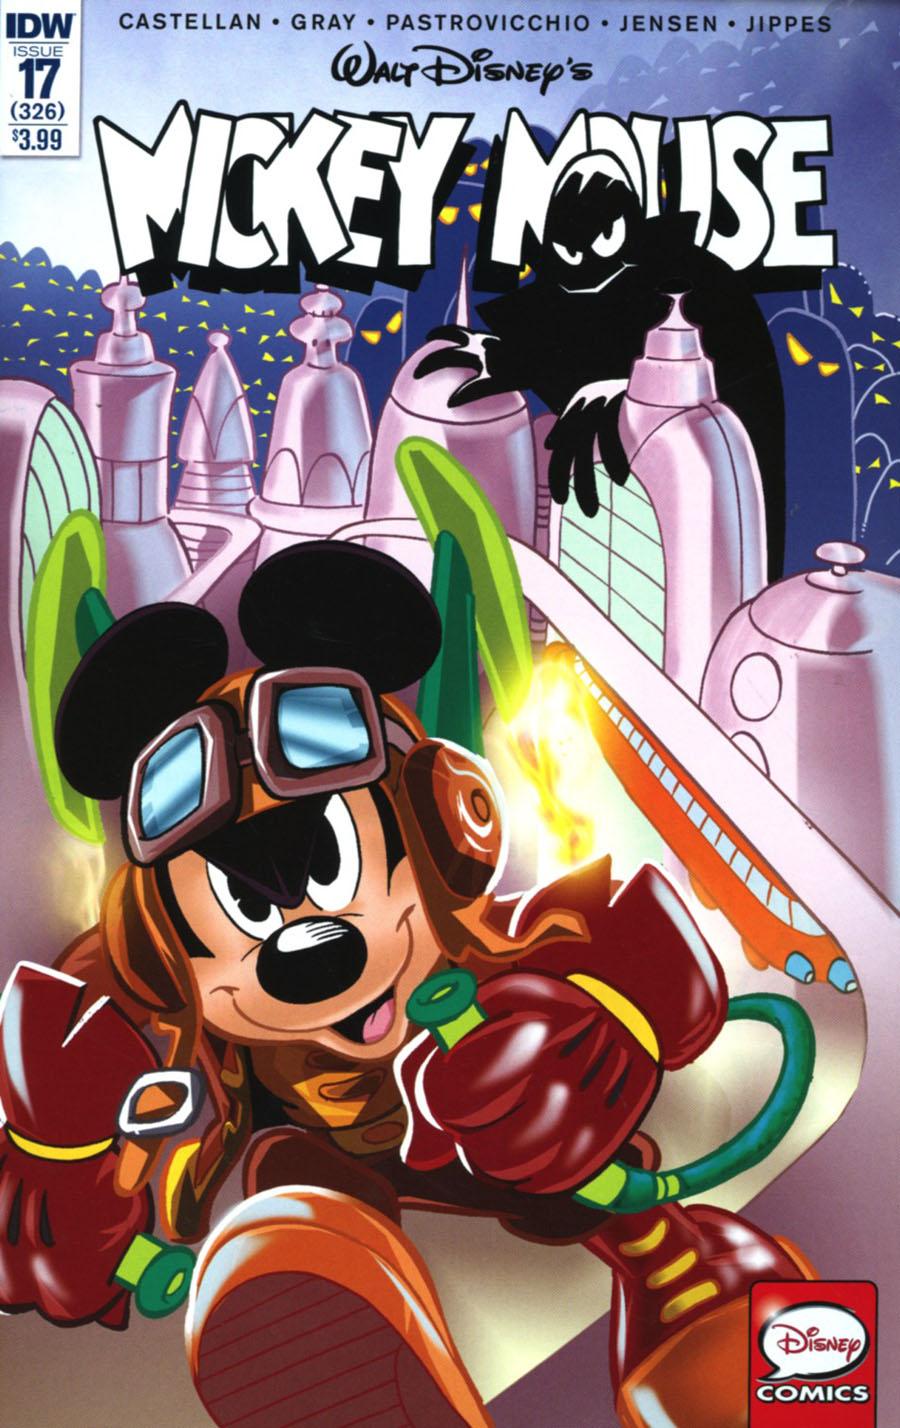 Mickey Mouse Vol. 2 #17